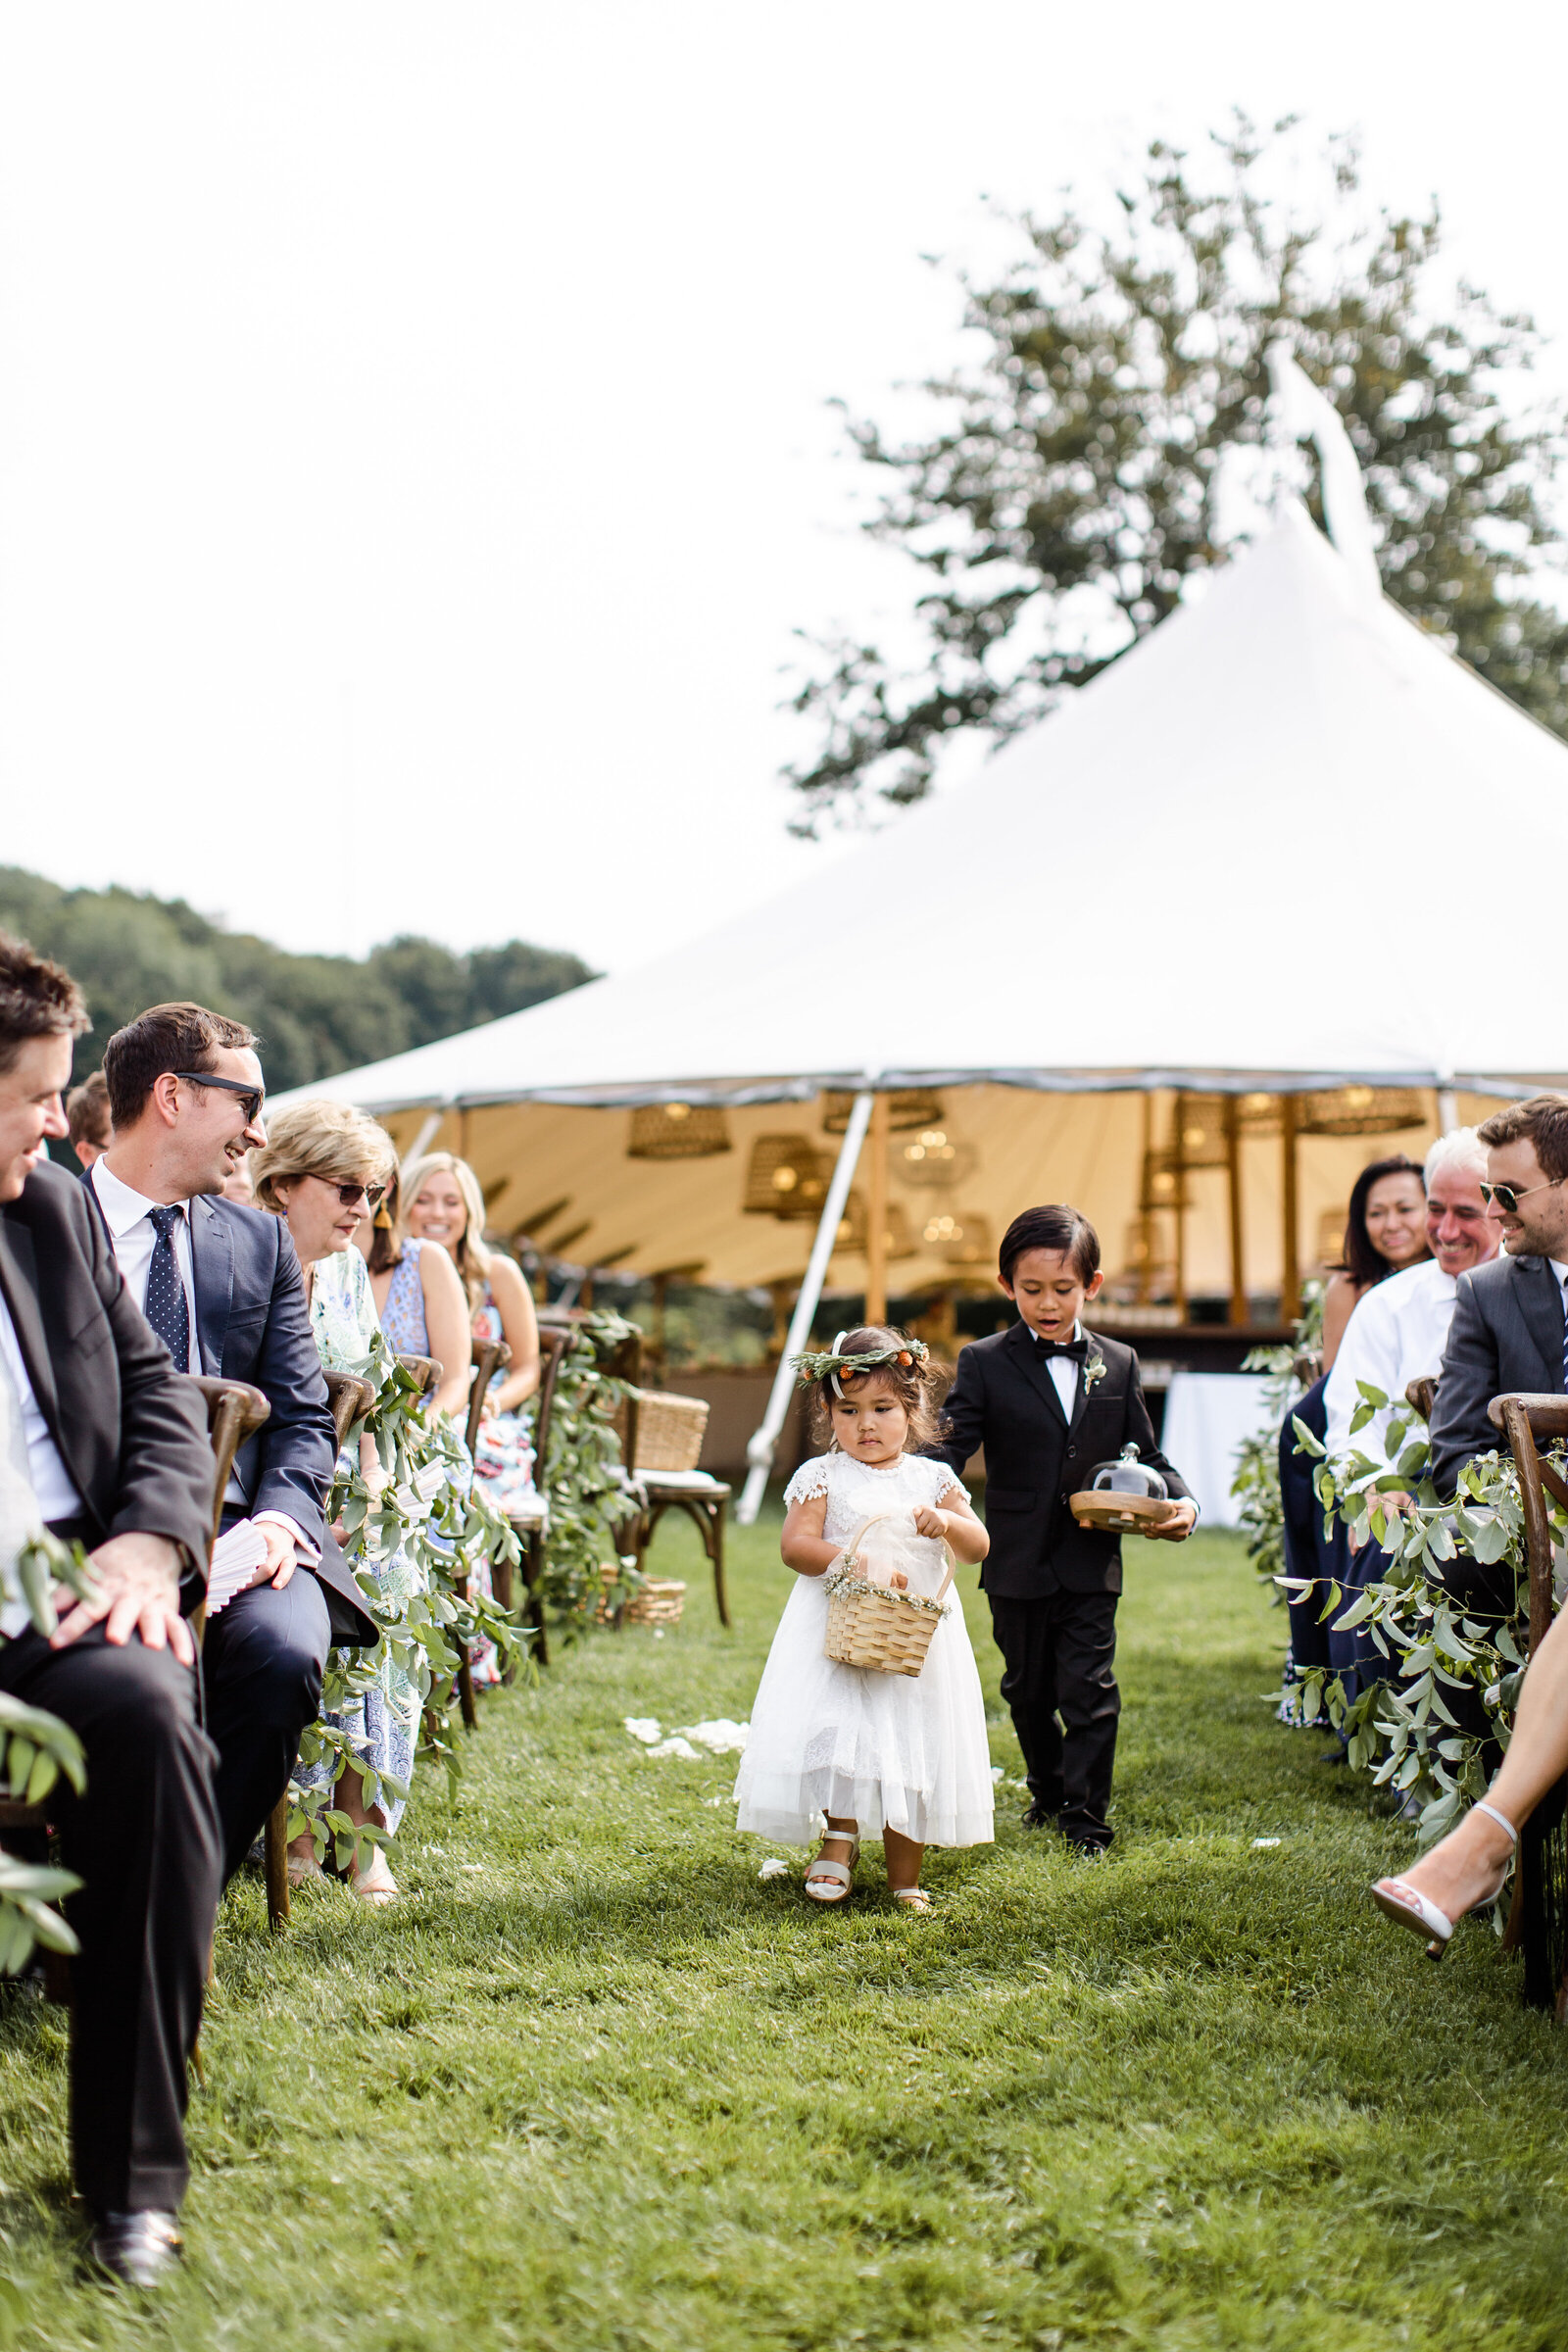 jubilee_events_connecticut_summer_tented_wedding_49